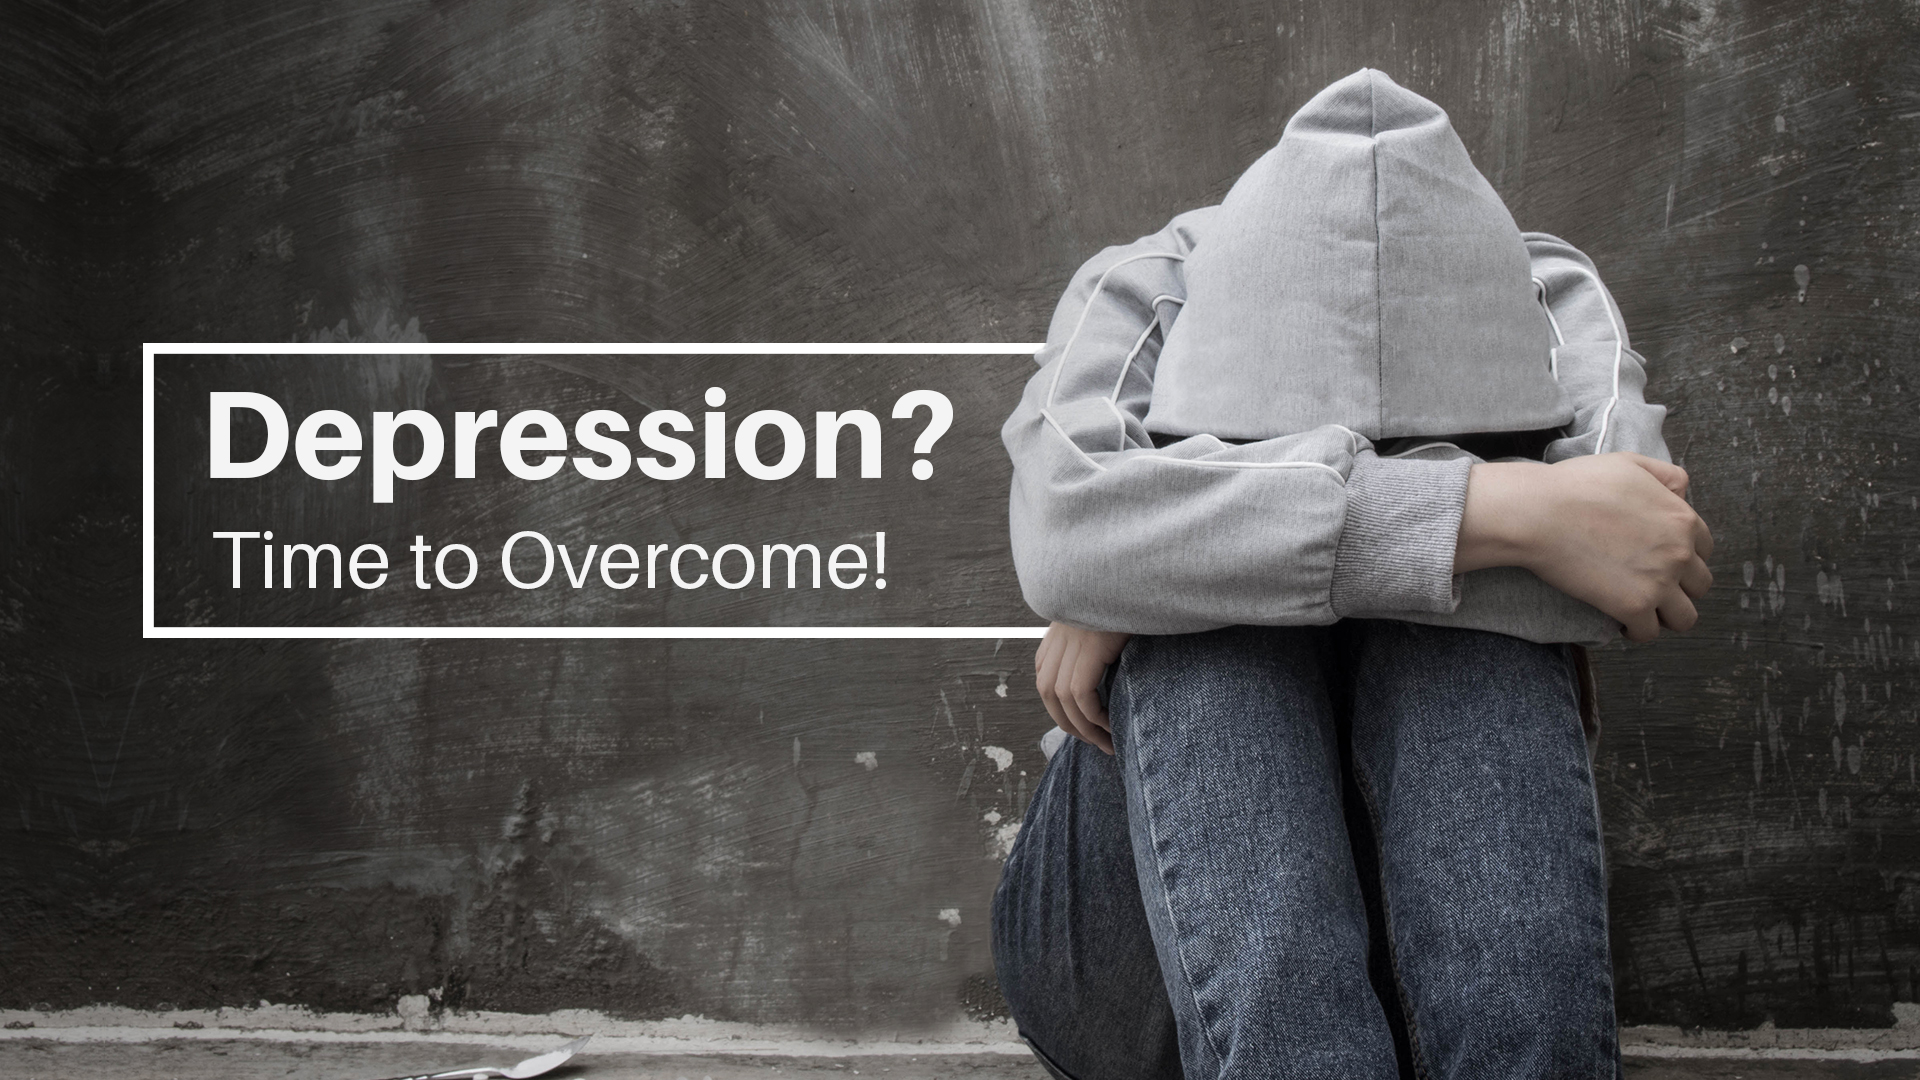 Living with Depression? It’s time to Overcome